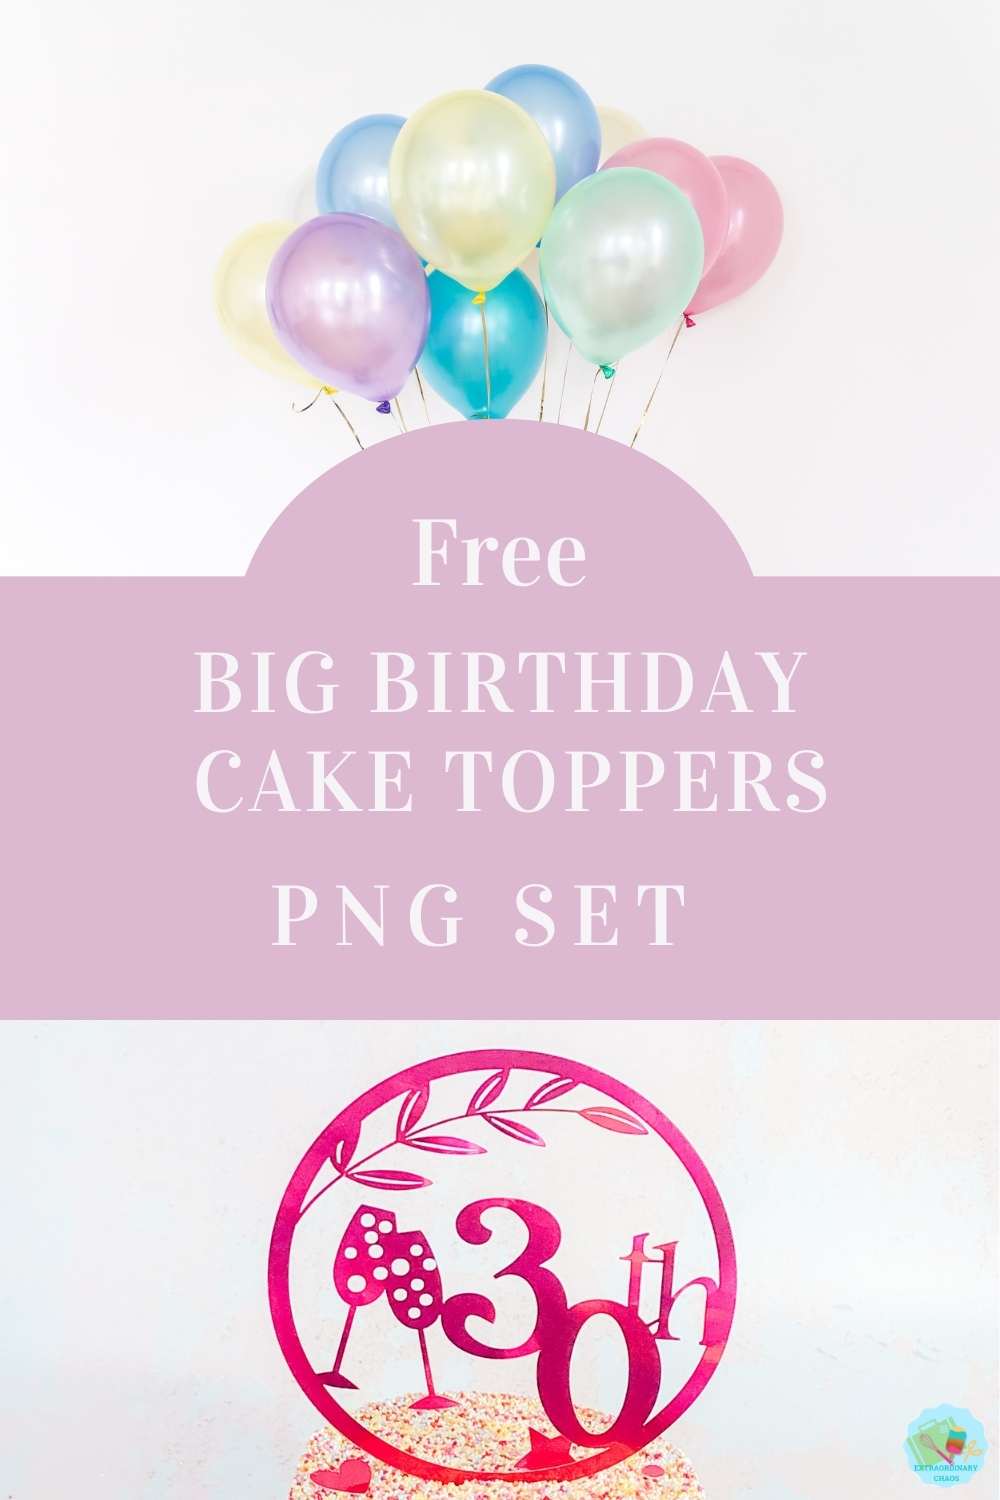 Cricut Special Birthday Milestone birthday cake topper files PNG Files for multiple decorating birthday cakes